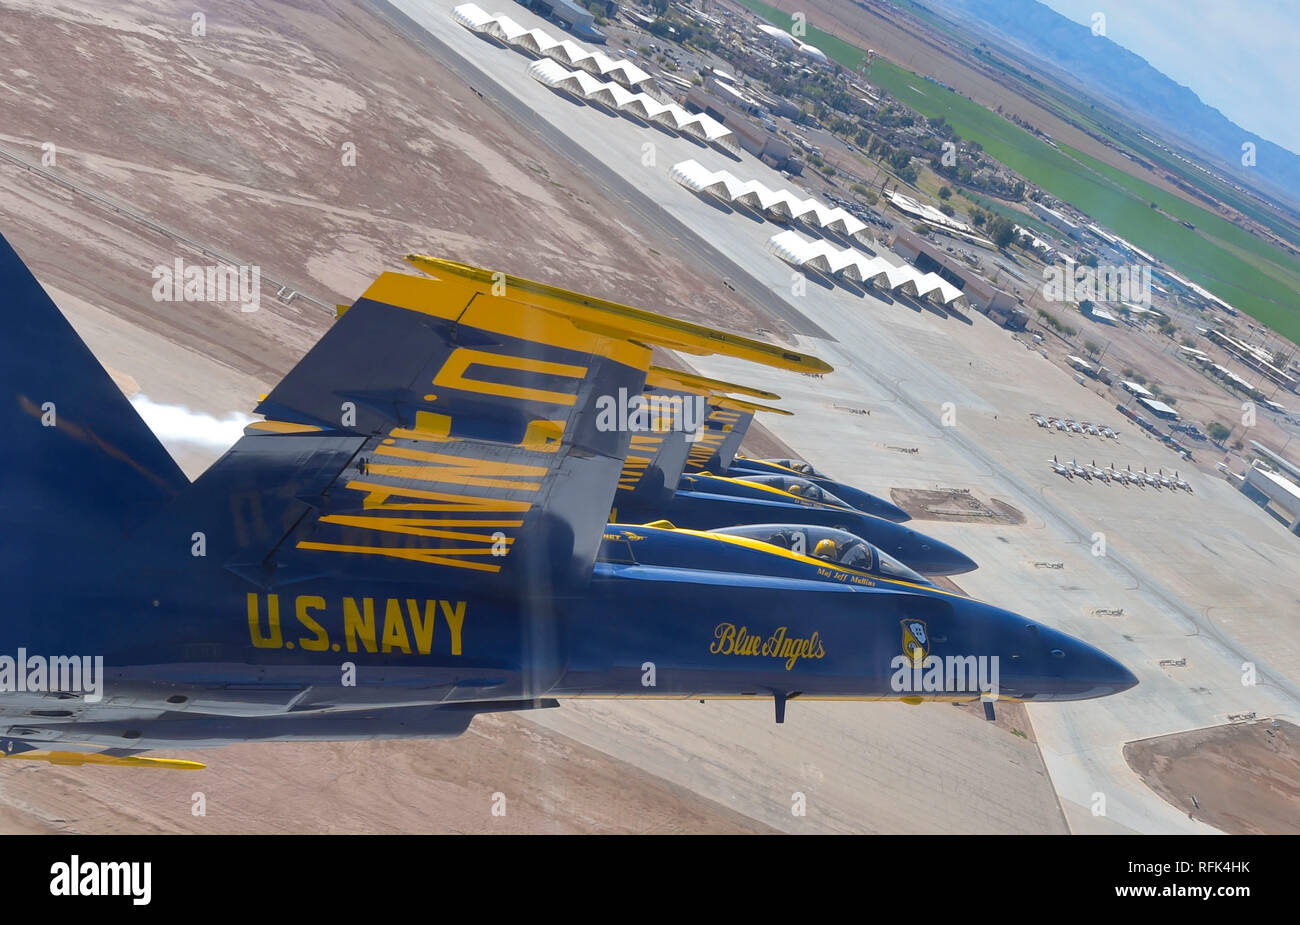 190124-N-OY339-1296 EL CENTRO, Calif. (Jan. 24, 2019) — Pilots assigned to the U.S. Navy Flight Demonstration Squadron, the Blue Angels, perform the left echelon parade maneuver during a winter training flight over Naval Air Facility (NAF) El Centro. The team is scheduled to conduct 61 flight demonstrations at 32 locations across the country to showcase the pride and professionalism of the U.S. Navy and Marine Corps to the American public in 2019. (U.S. Navy photo by Mass Communication Specialist 2nd Class Christopher Gordon) Stock Photo